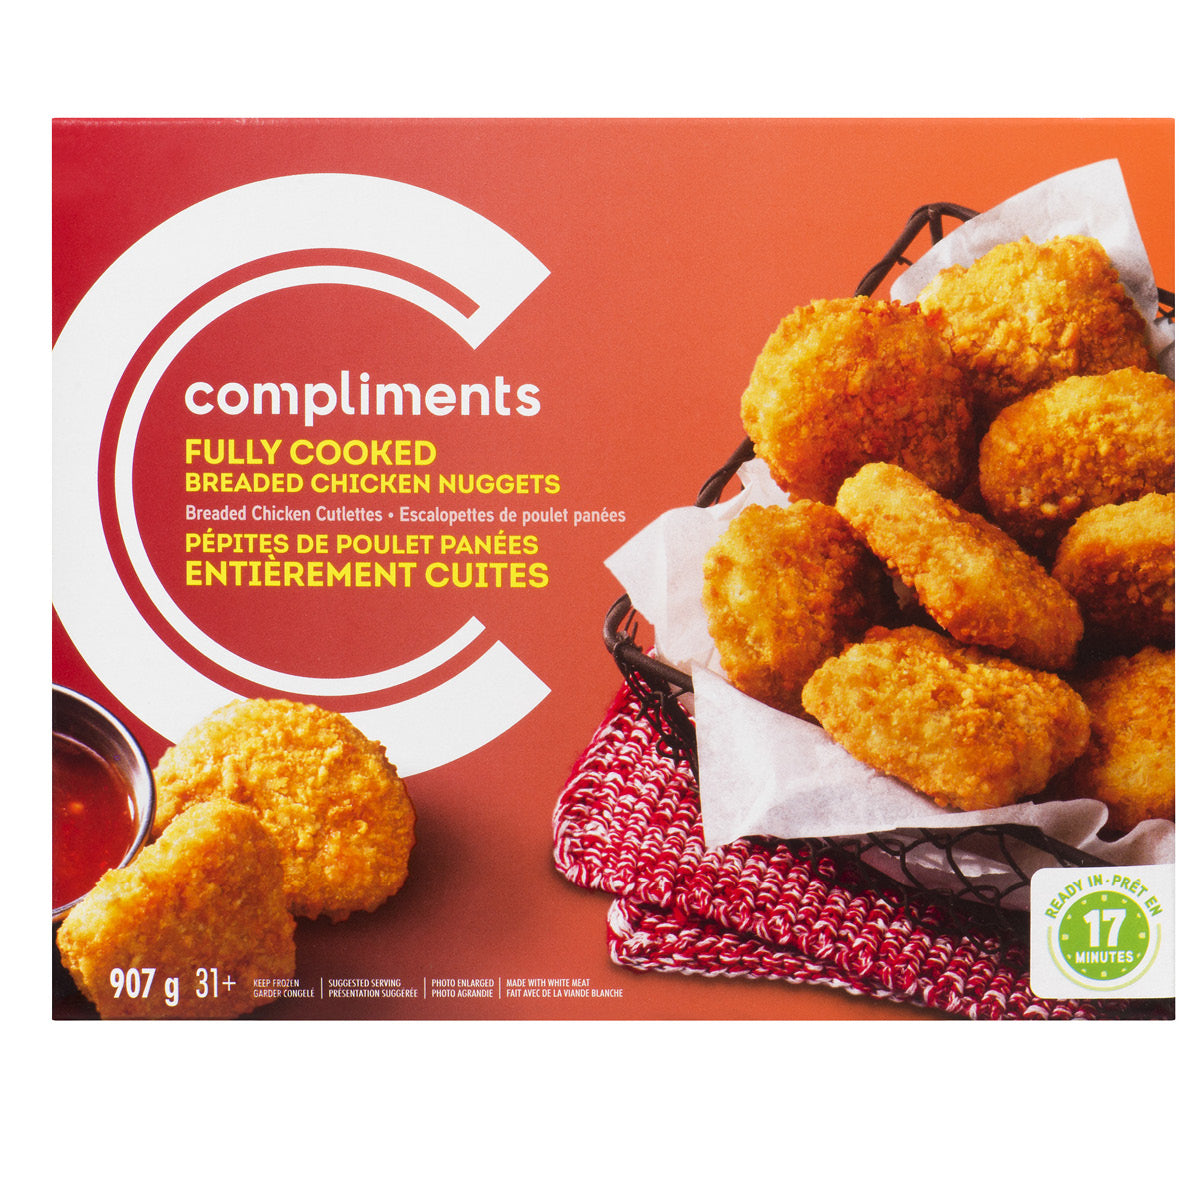 Compliments Chicken Nuggets, Fully Cooked, 907g